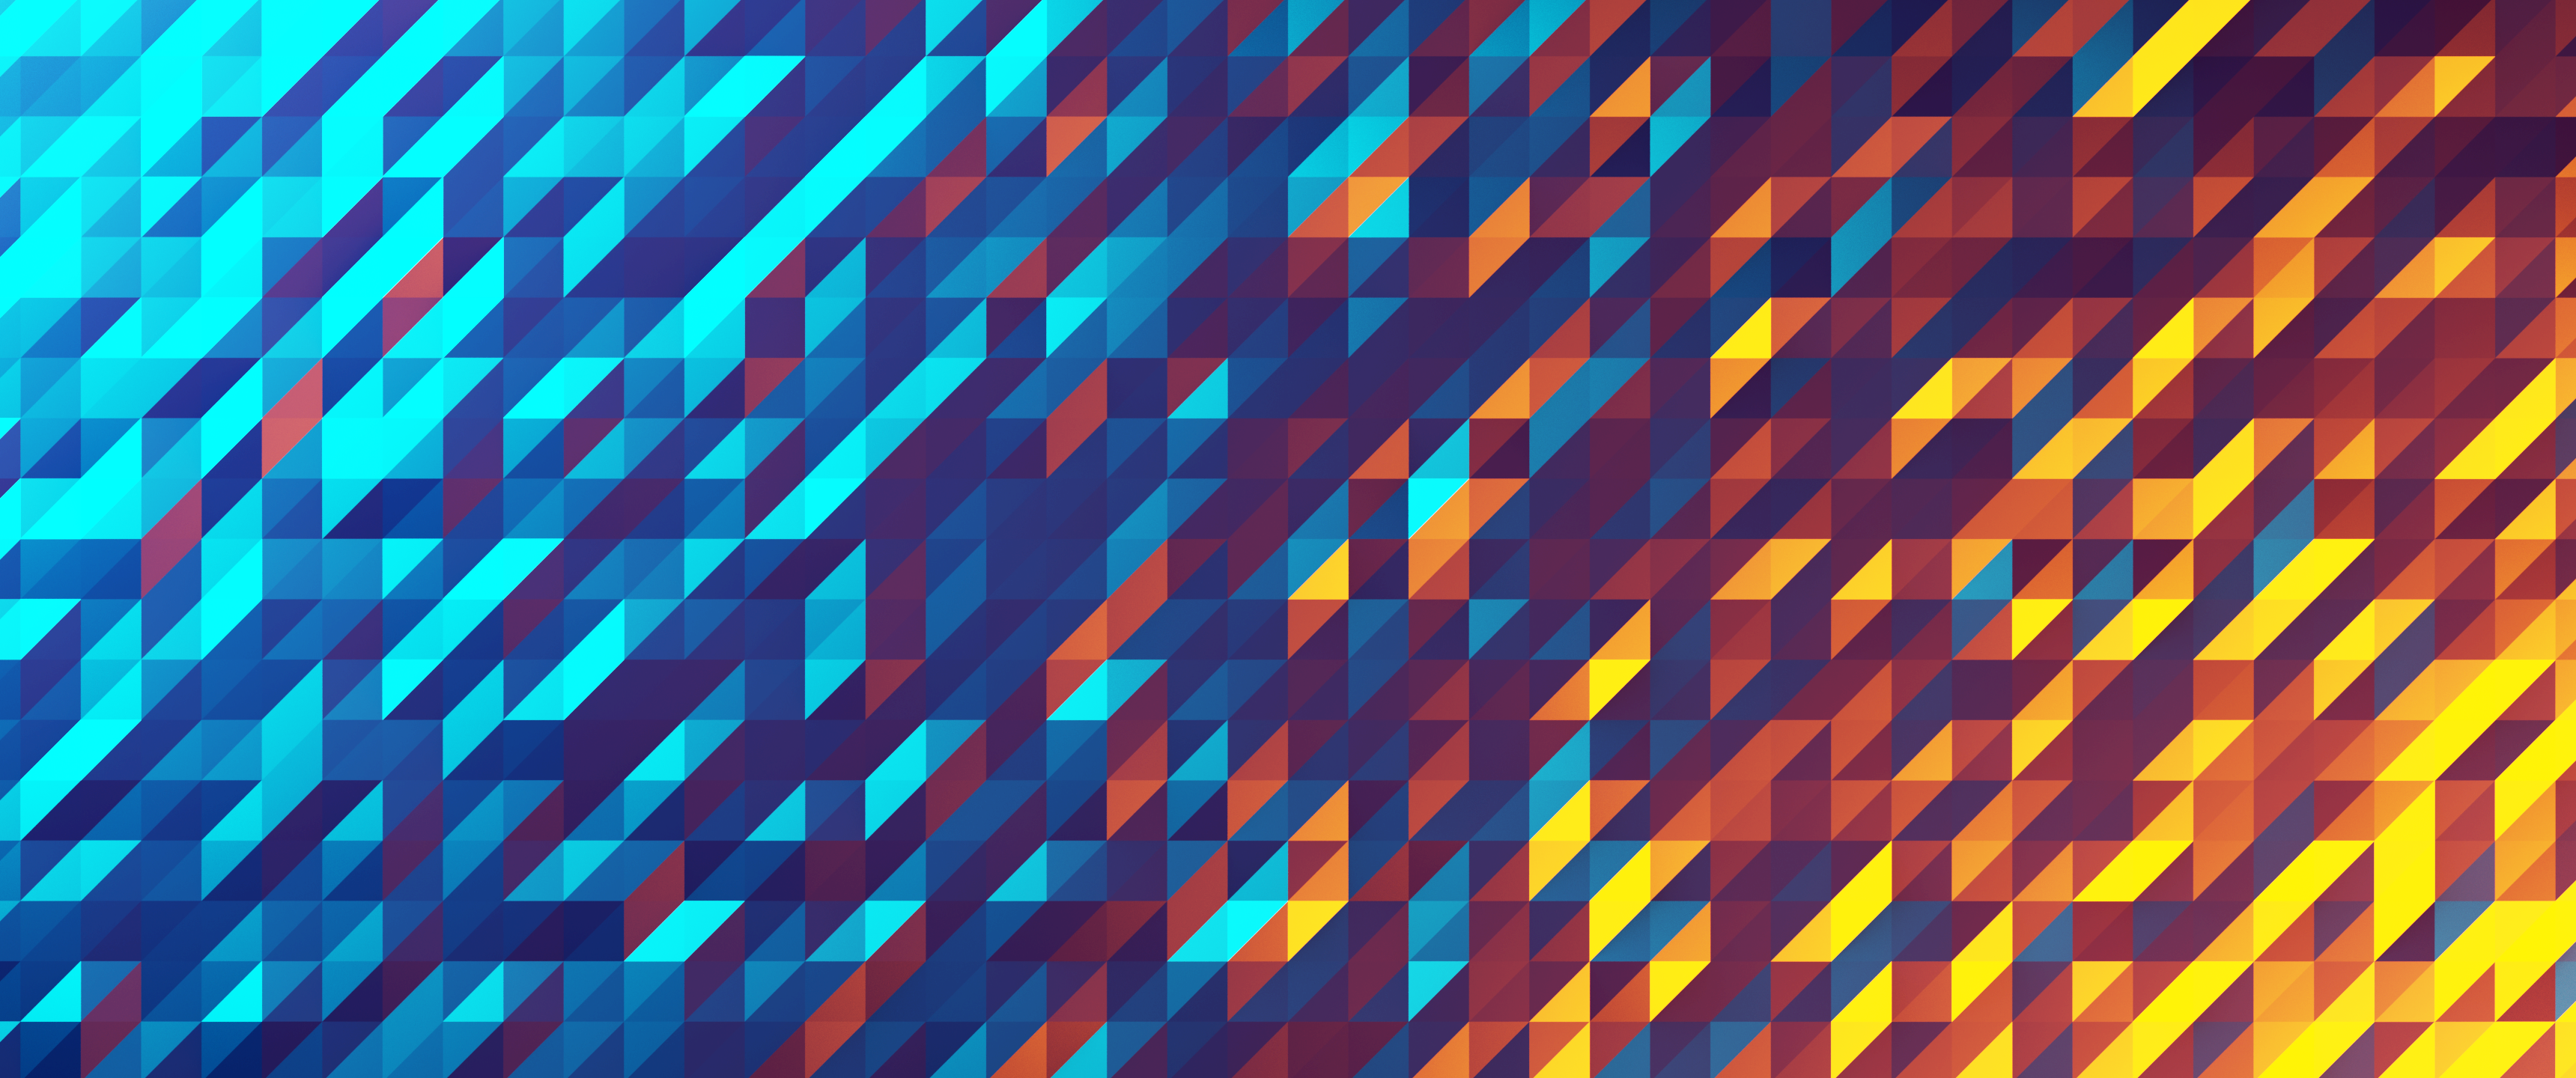 Orange And Blue Geometric Wallpapers - Wallpaper Cave